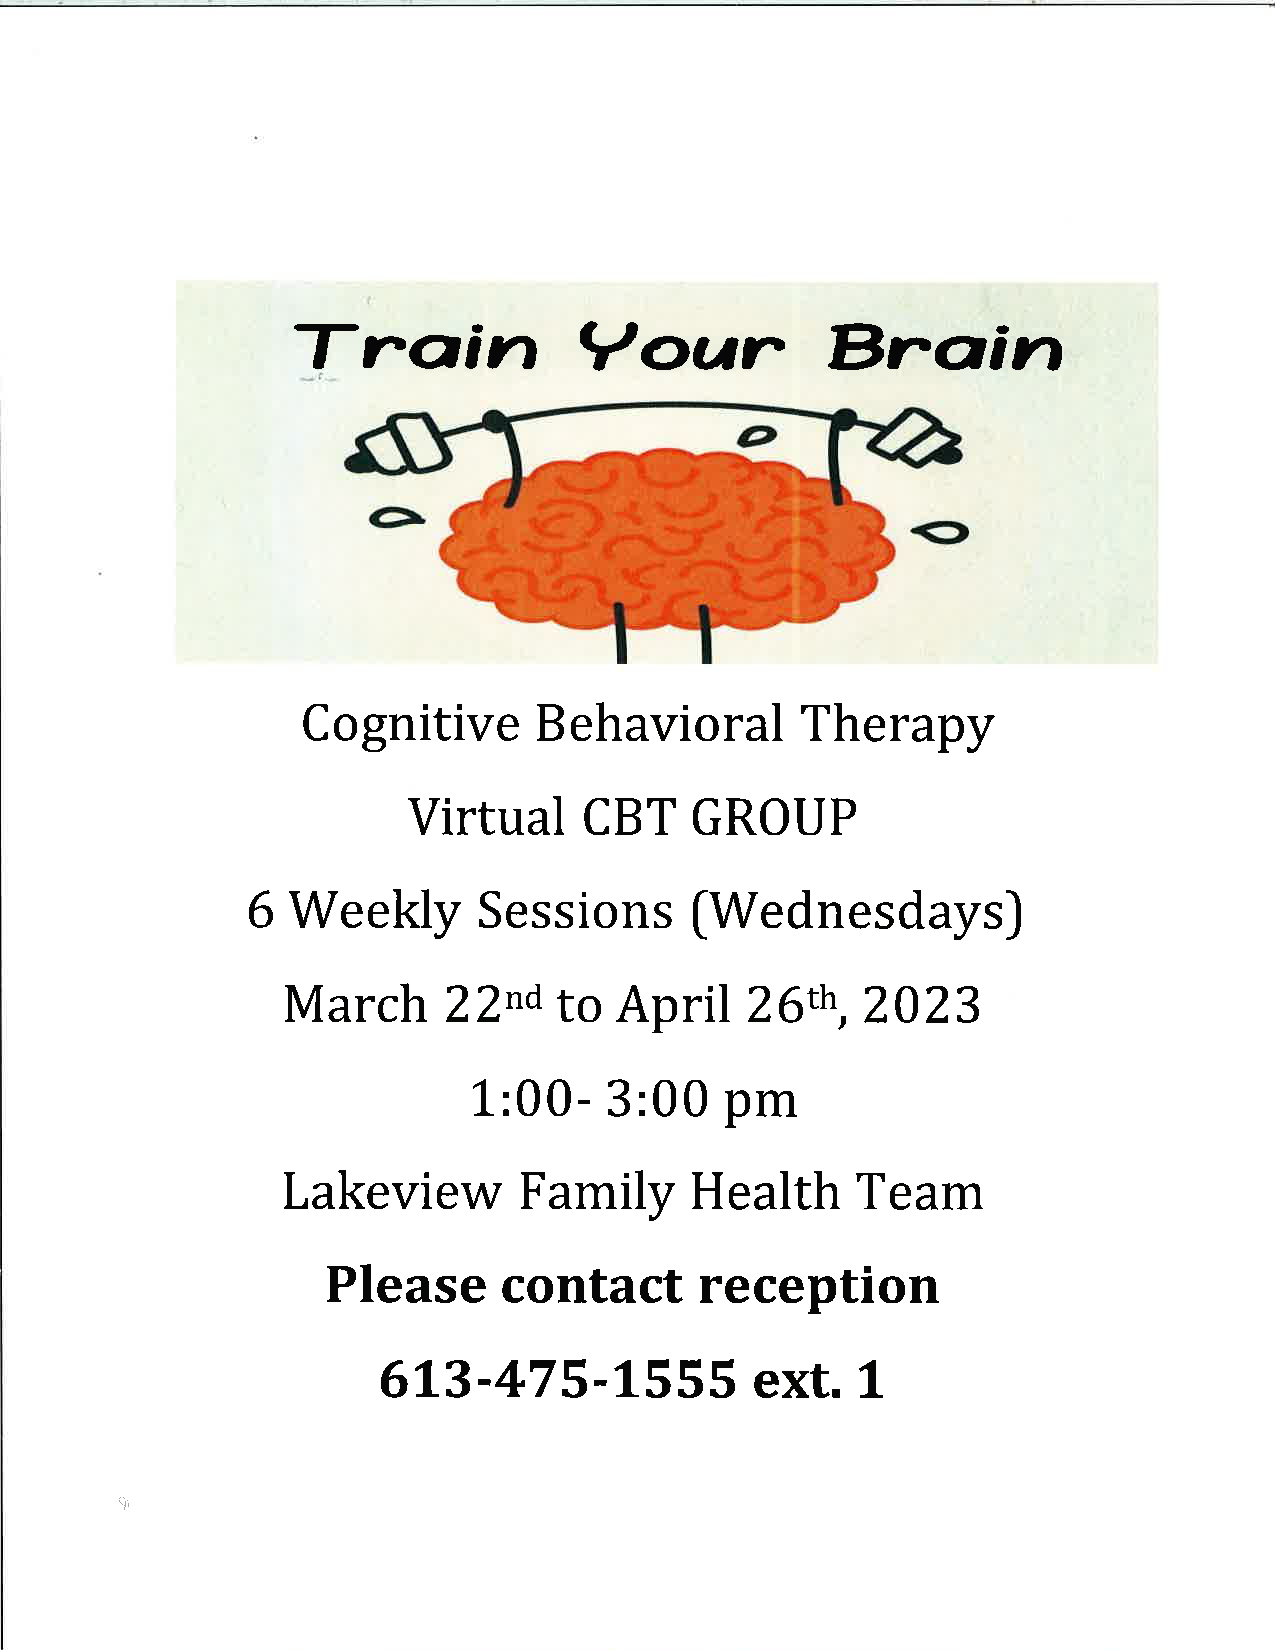 Image depicting Train Your Brain Virtual CBT Group